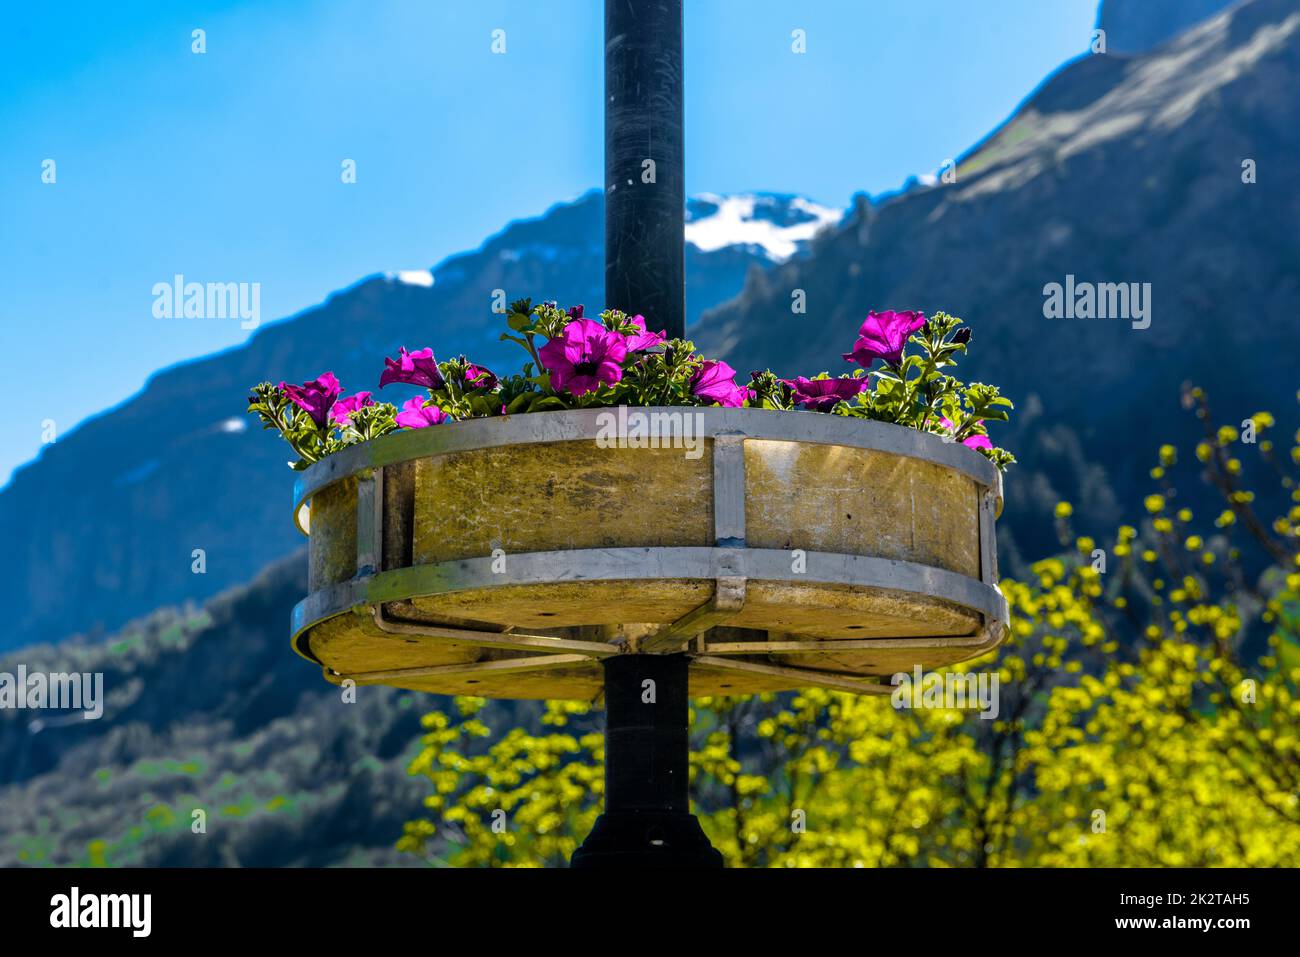 Violets flowers on the column with Alp mountains in background Stock Photo